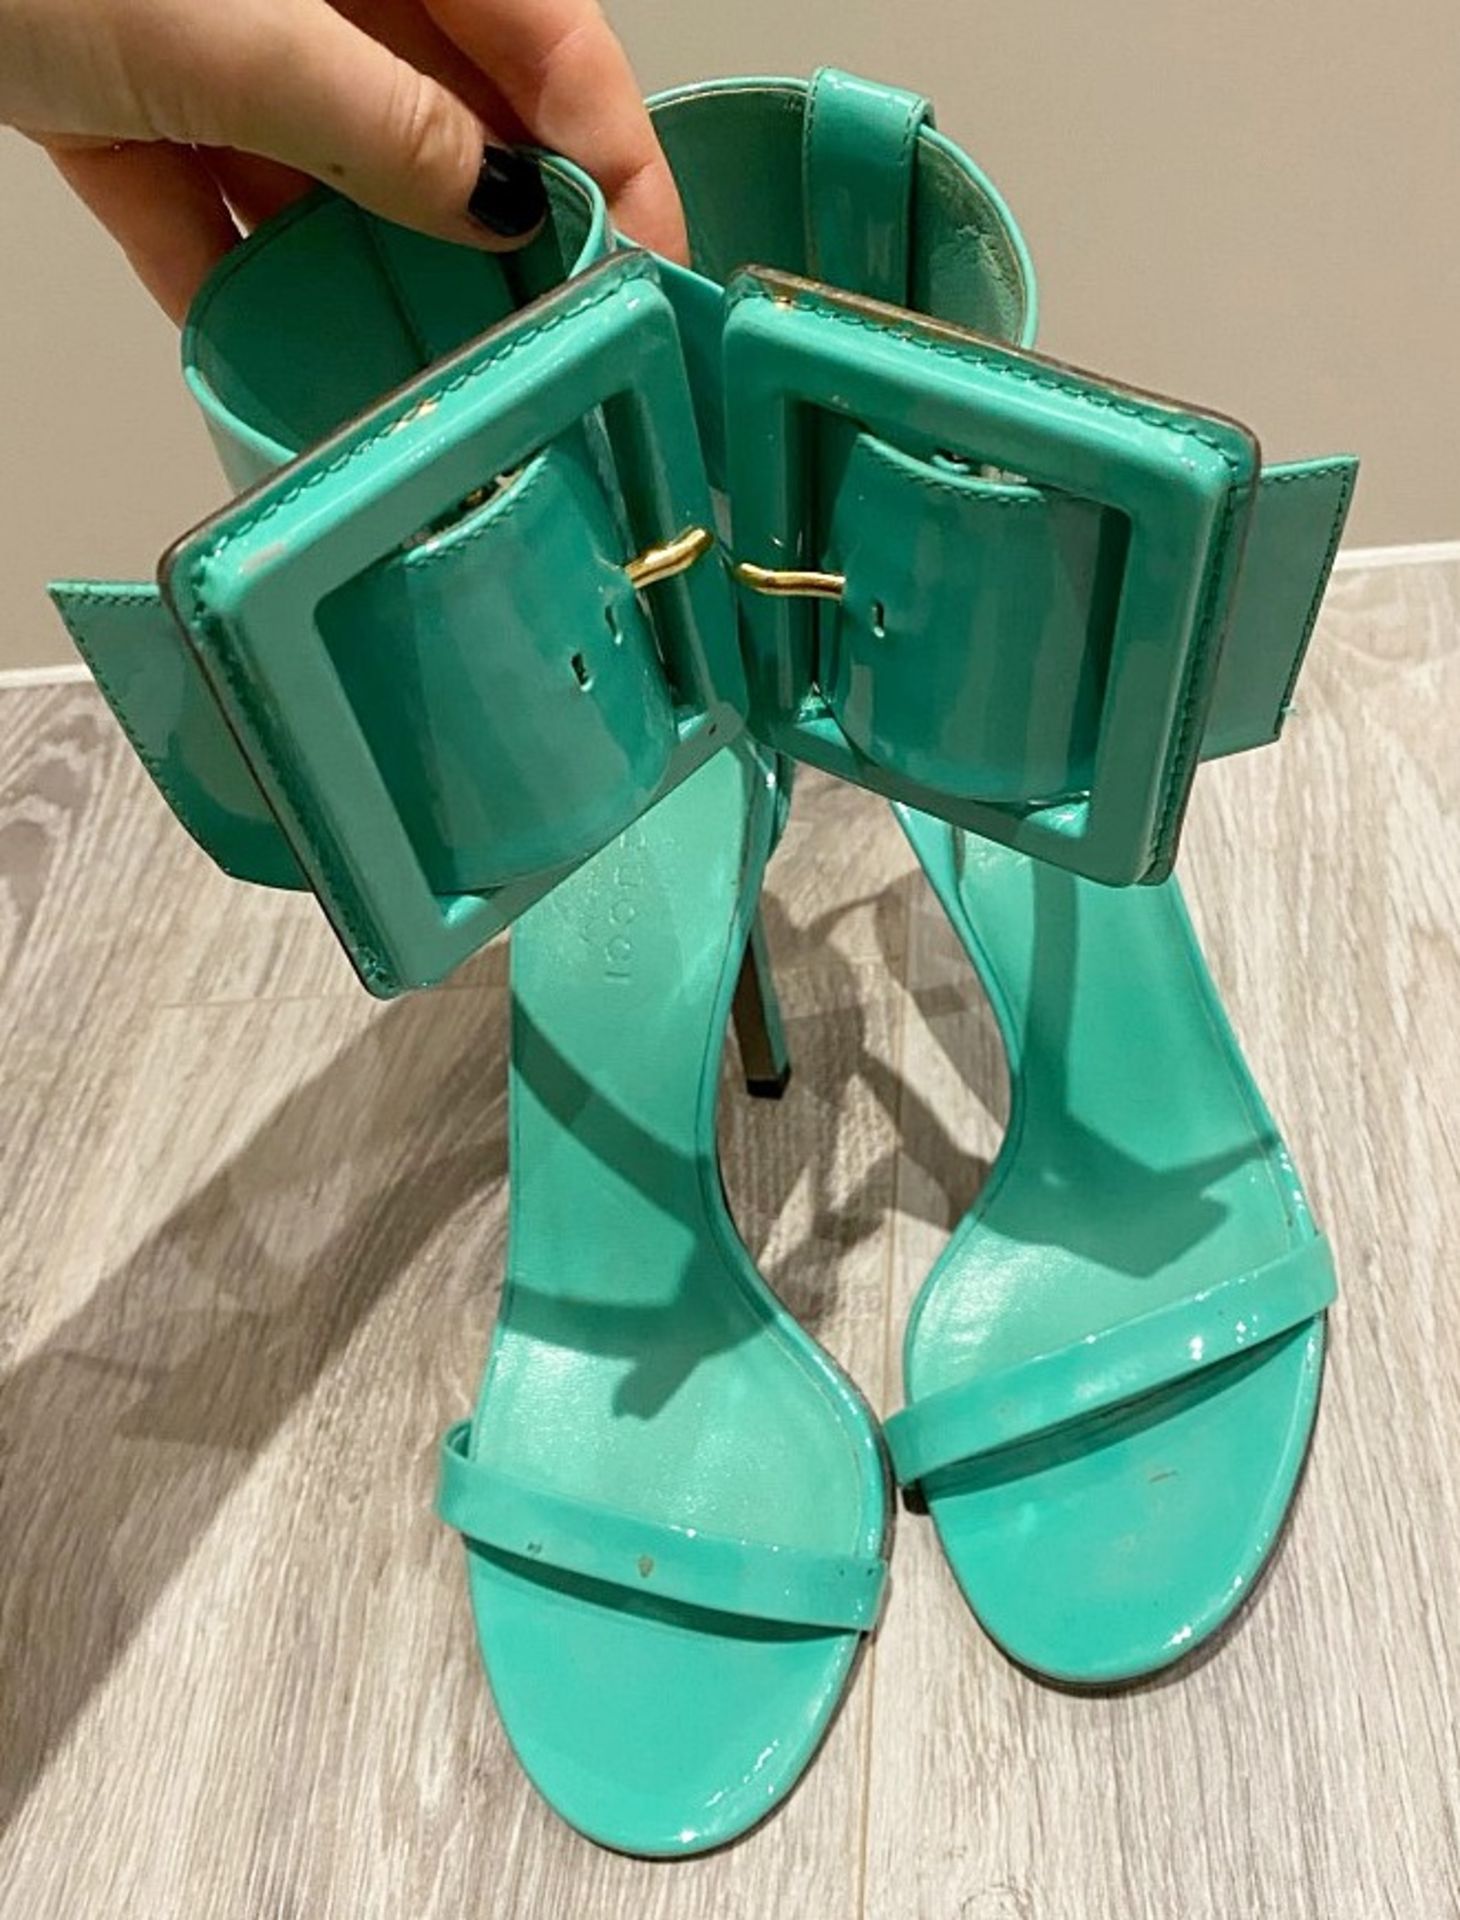 1 x Pair Of Genuine Gucci High Heel Shoes In Green - Size: 36 - Preowned in Worn Condition - Ref: LO